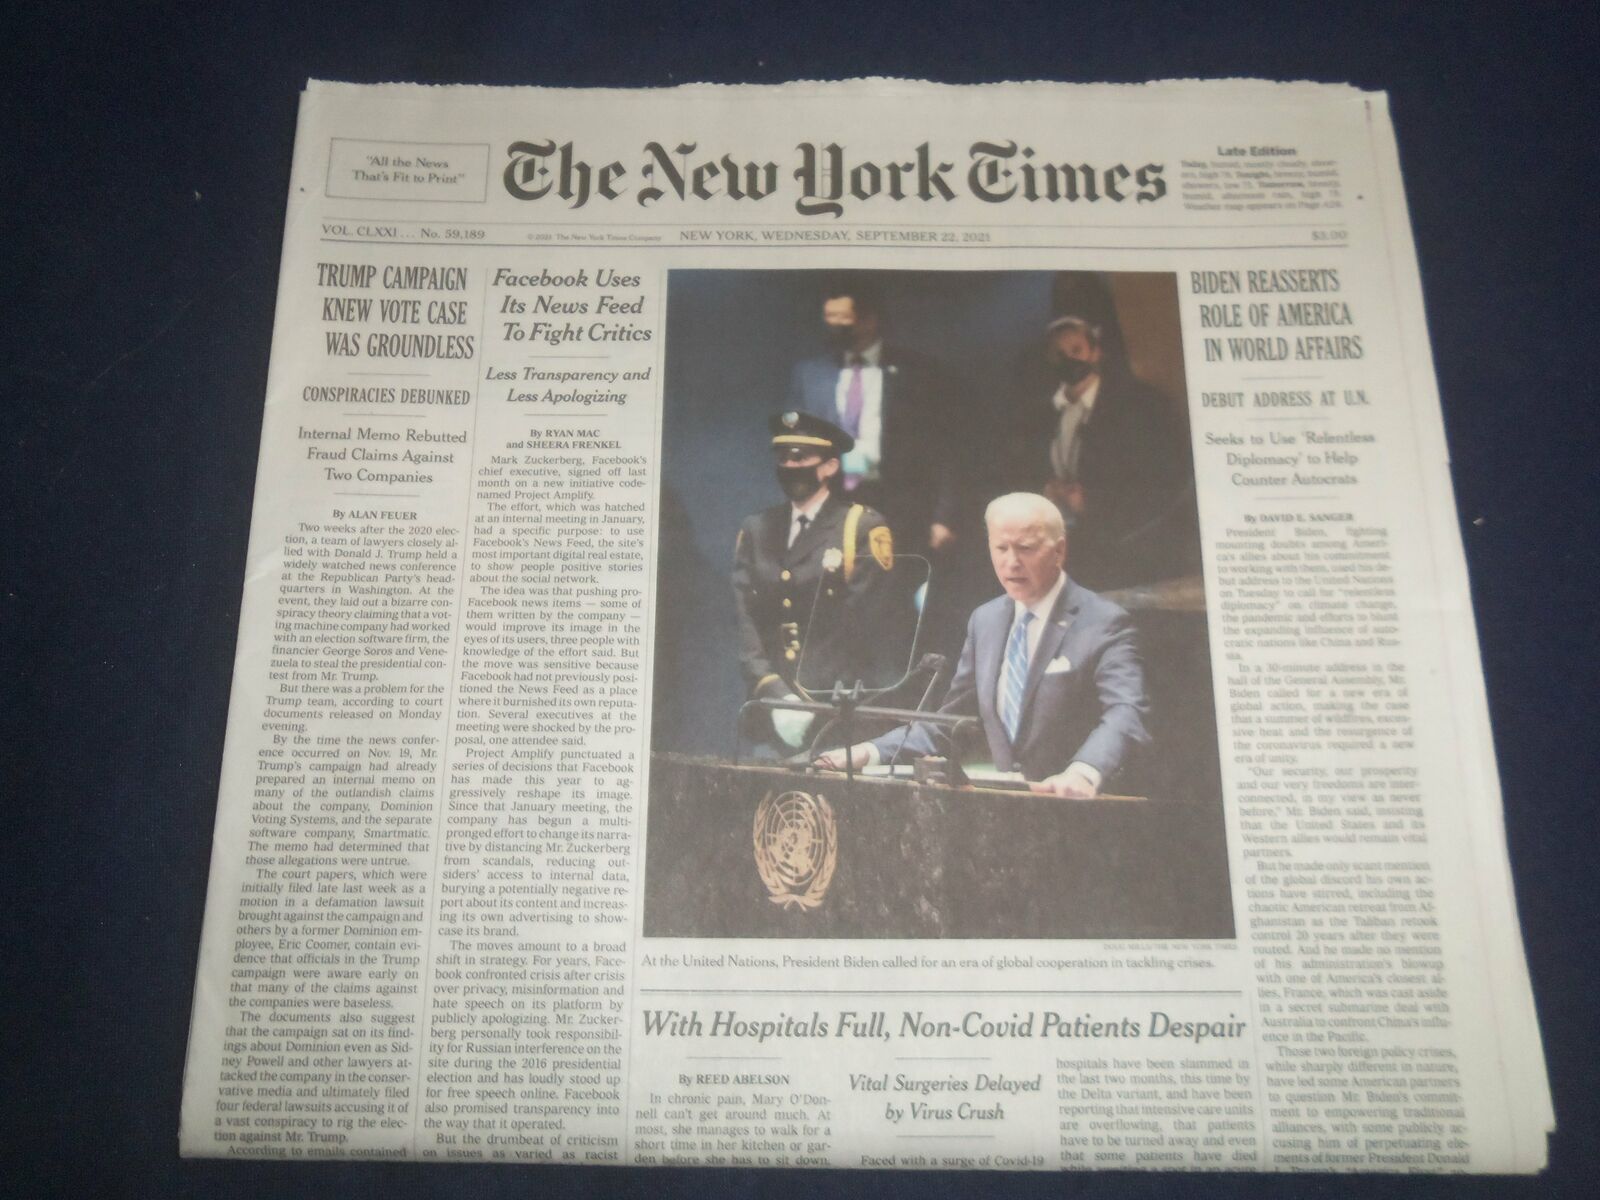 2021 SEP 22 NEW YORK TIMES - BIDEN REASSERTS ROLE OF AMERICA IN WORLD AFFAIRS